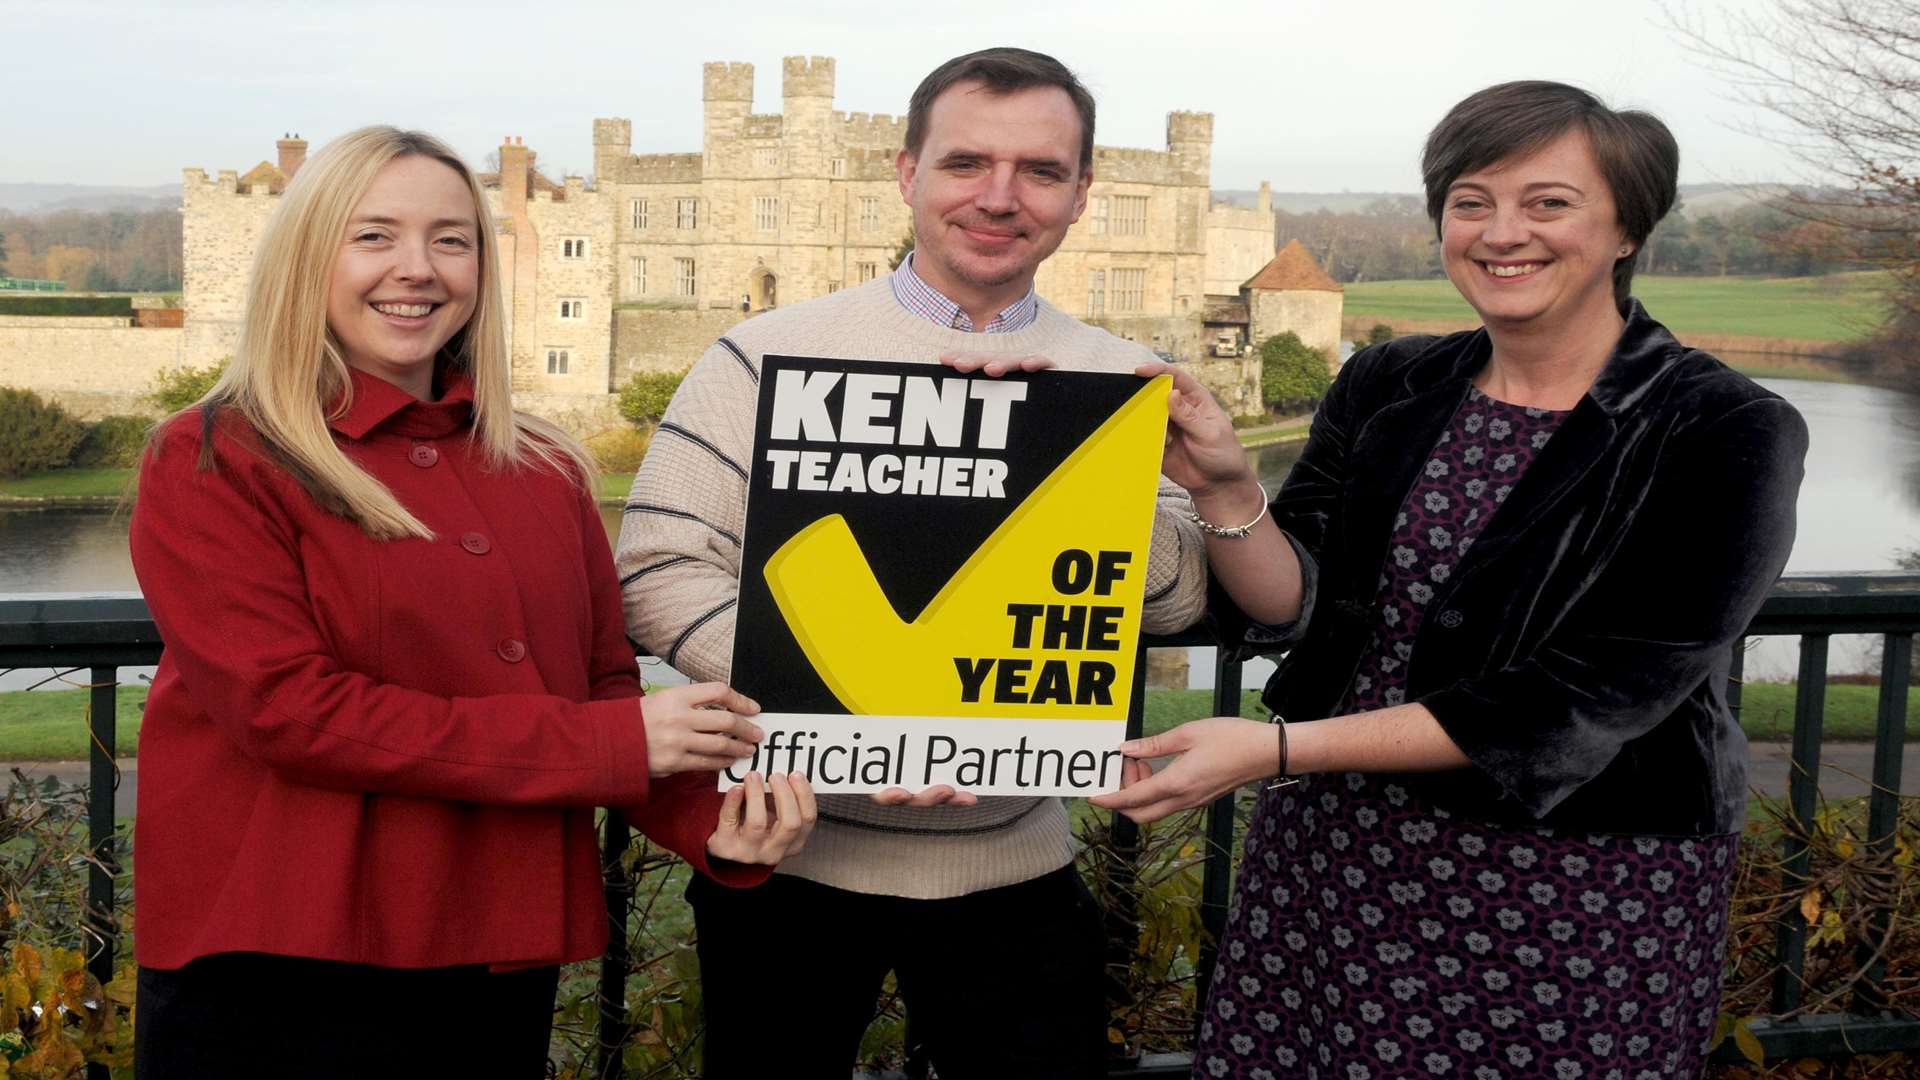 Sally Williamson and Peter Heckel of Project Salus and Nicola Podd from SELT urge parents, pupils and colleagues to nominate their school stars for the Kent Teacher of the Year Awards 2015.